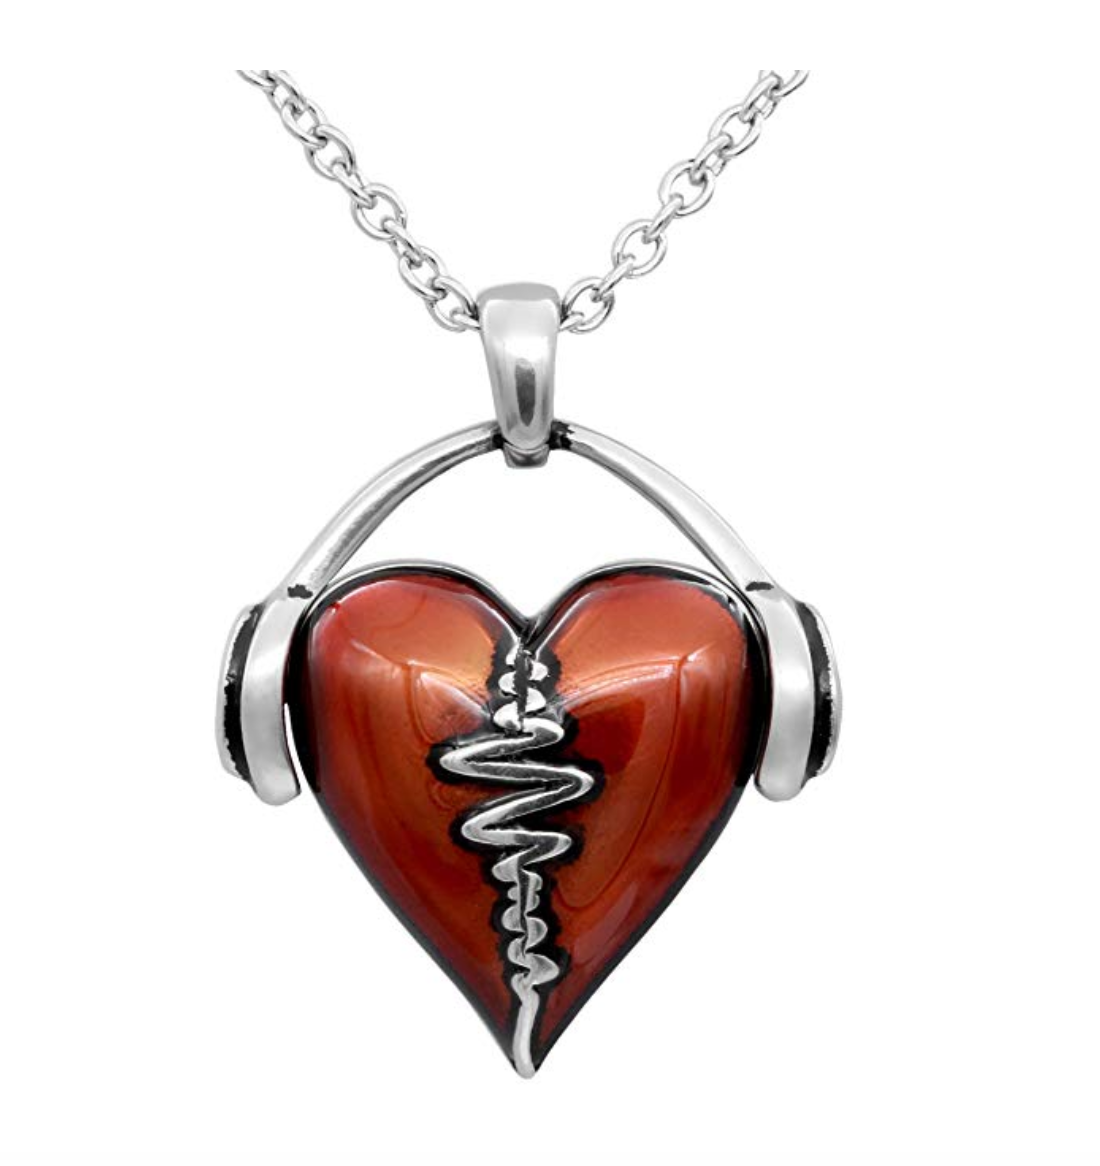 I Love Music Headphone Heart Music Necklace Musical Chain Music Heartbeat Music Love Stainless Steel 19in.